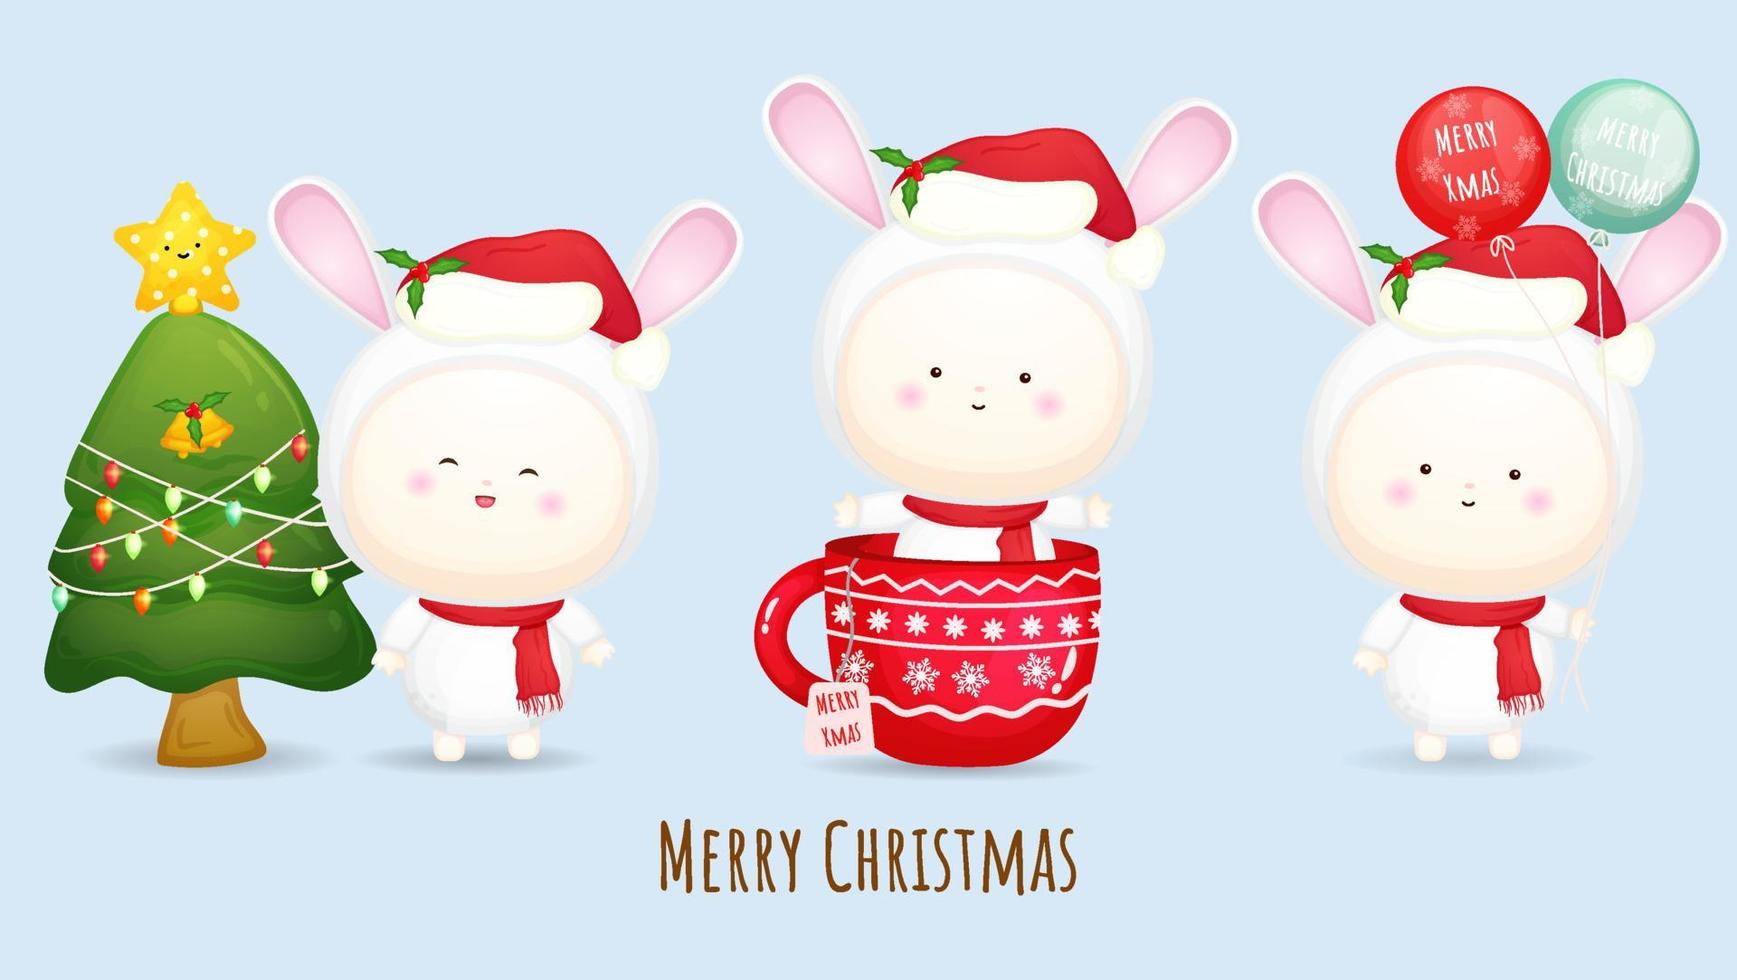 Cute baby wearing santa hat for merry christmas illustration set with different poses Premium Vector